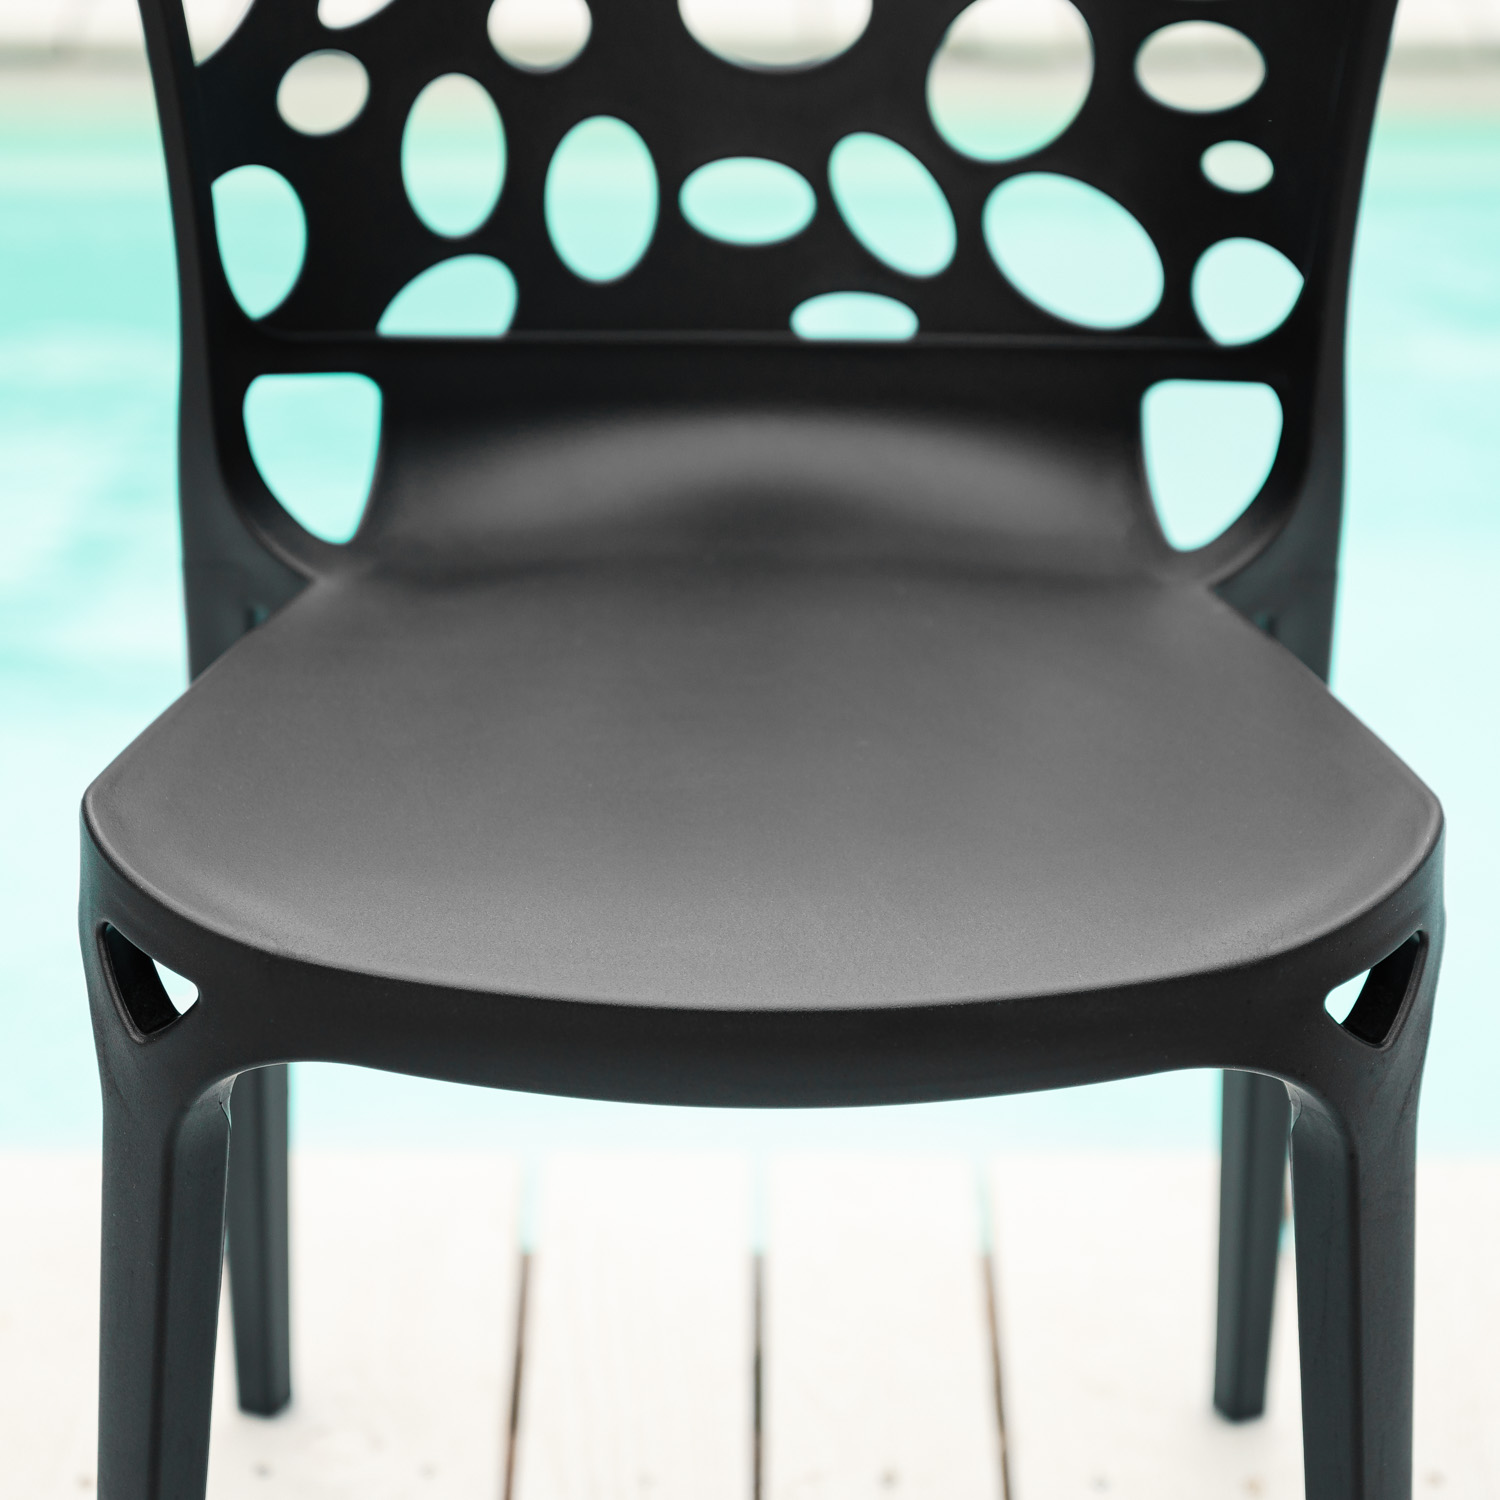 Garden chair Set of 2 Modern Black Camping chairs Outdoor chairs Plastic Stacking chairs Kitchen chairs